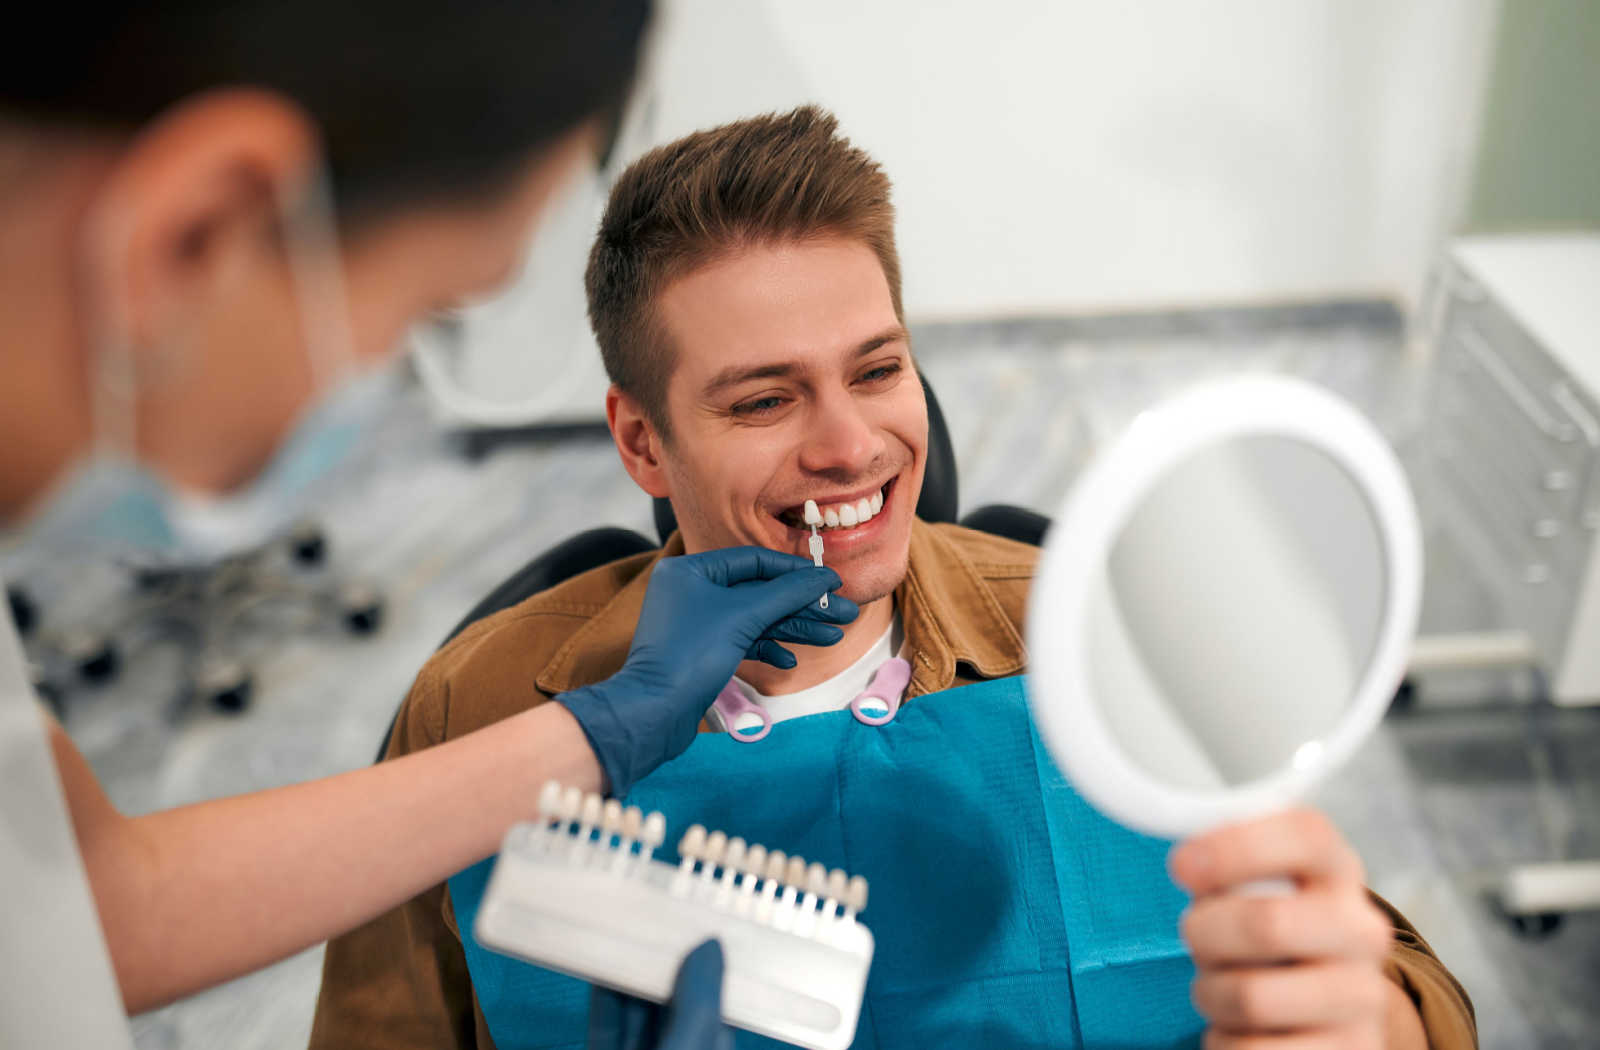 A man sitting on a dental chair is holding a mirror while the dentist is helping the patient colour match.